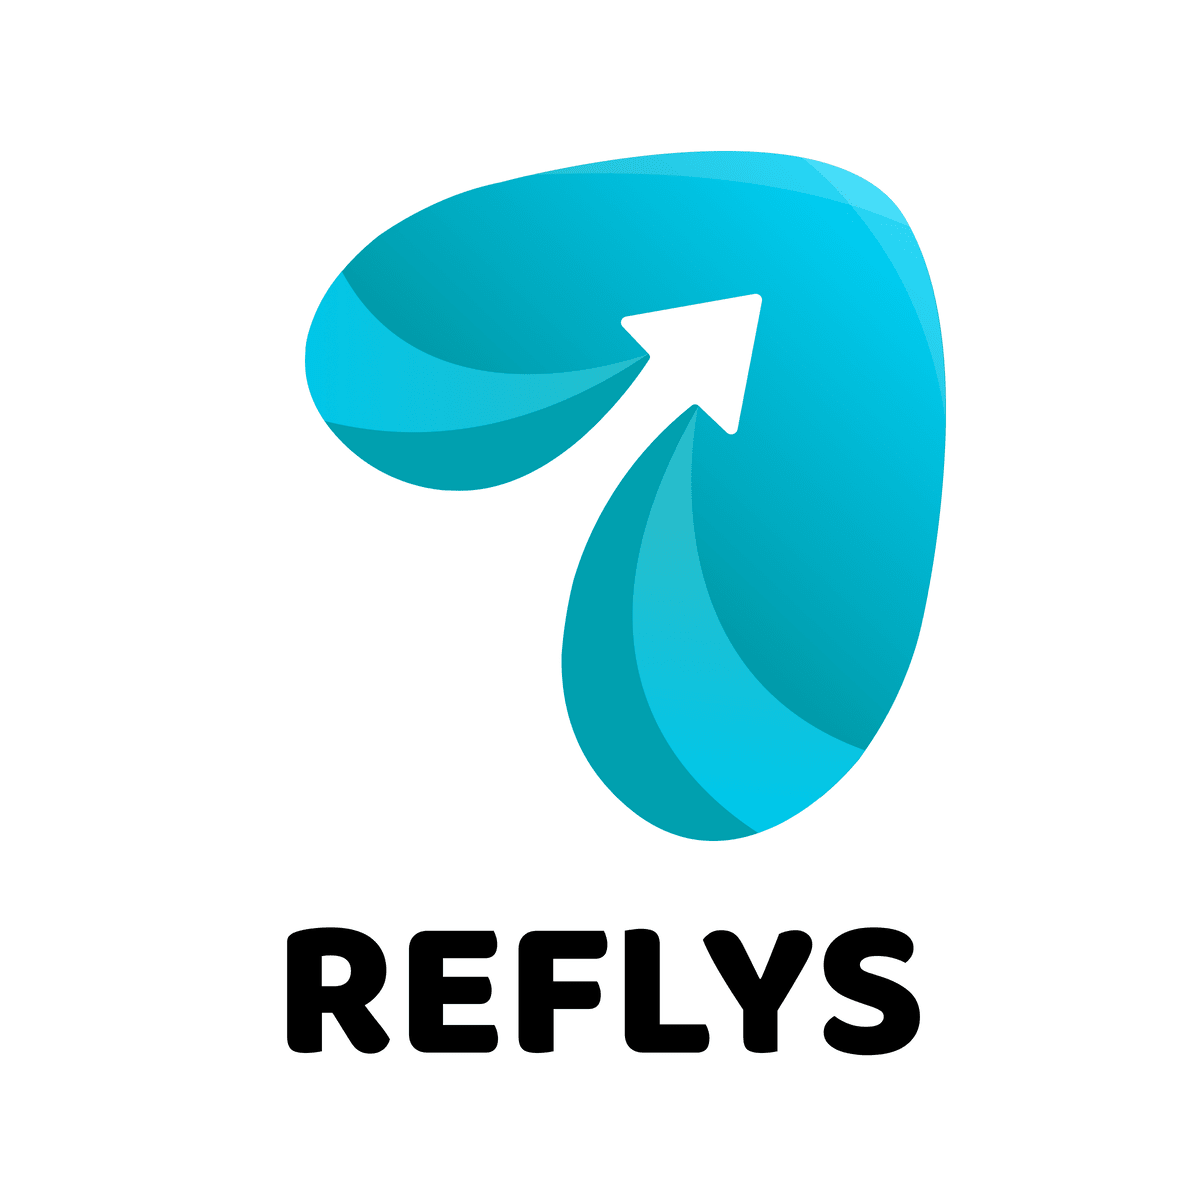 Reflys: Growth from community for Shopify